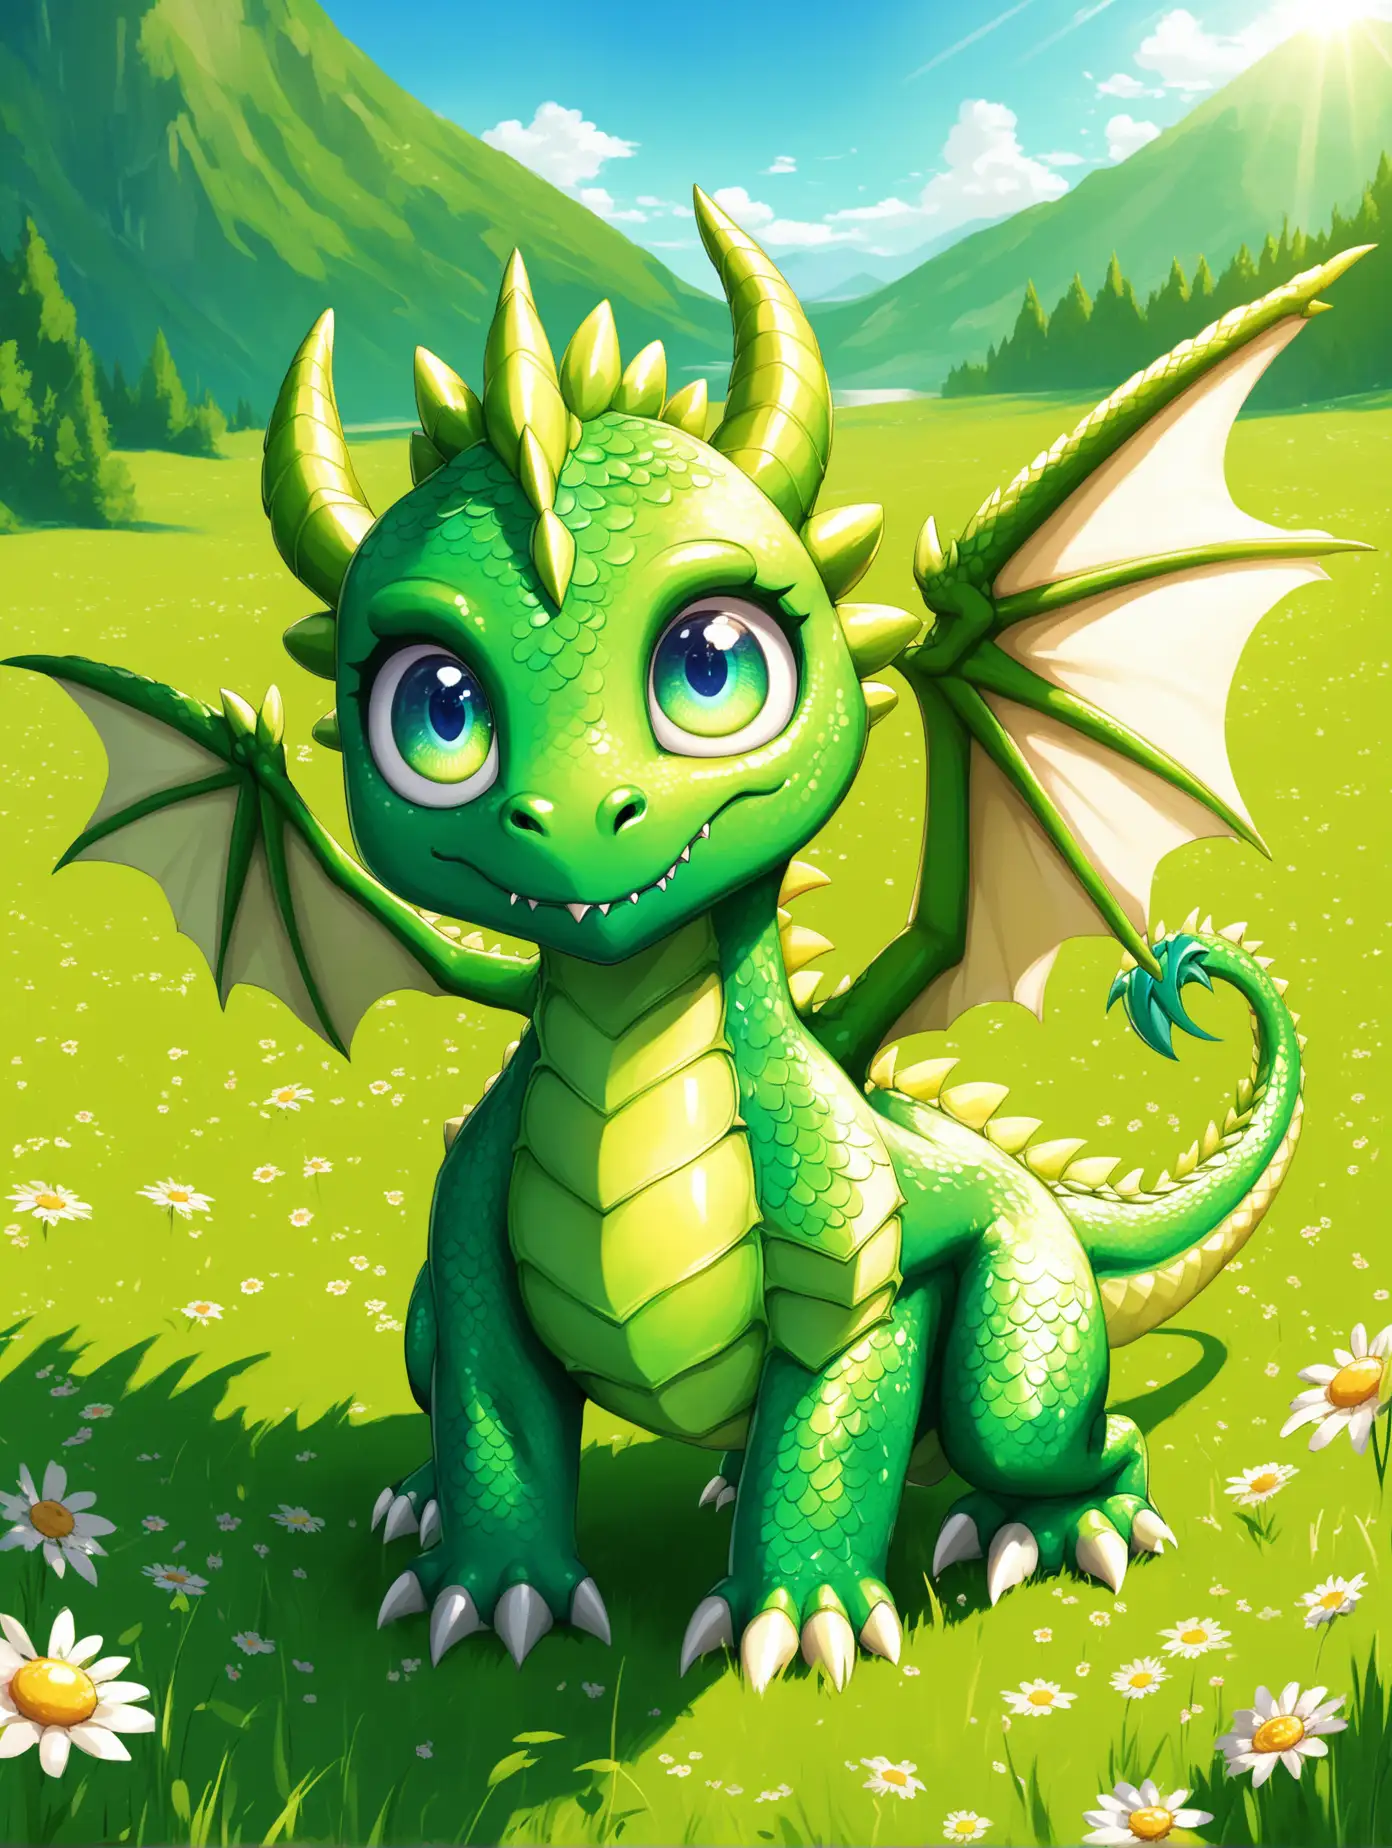 Bright Green Dragon Standing in Sunny Meadow